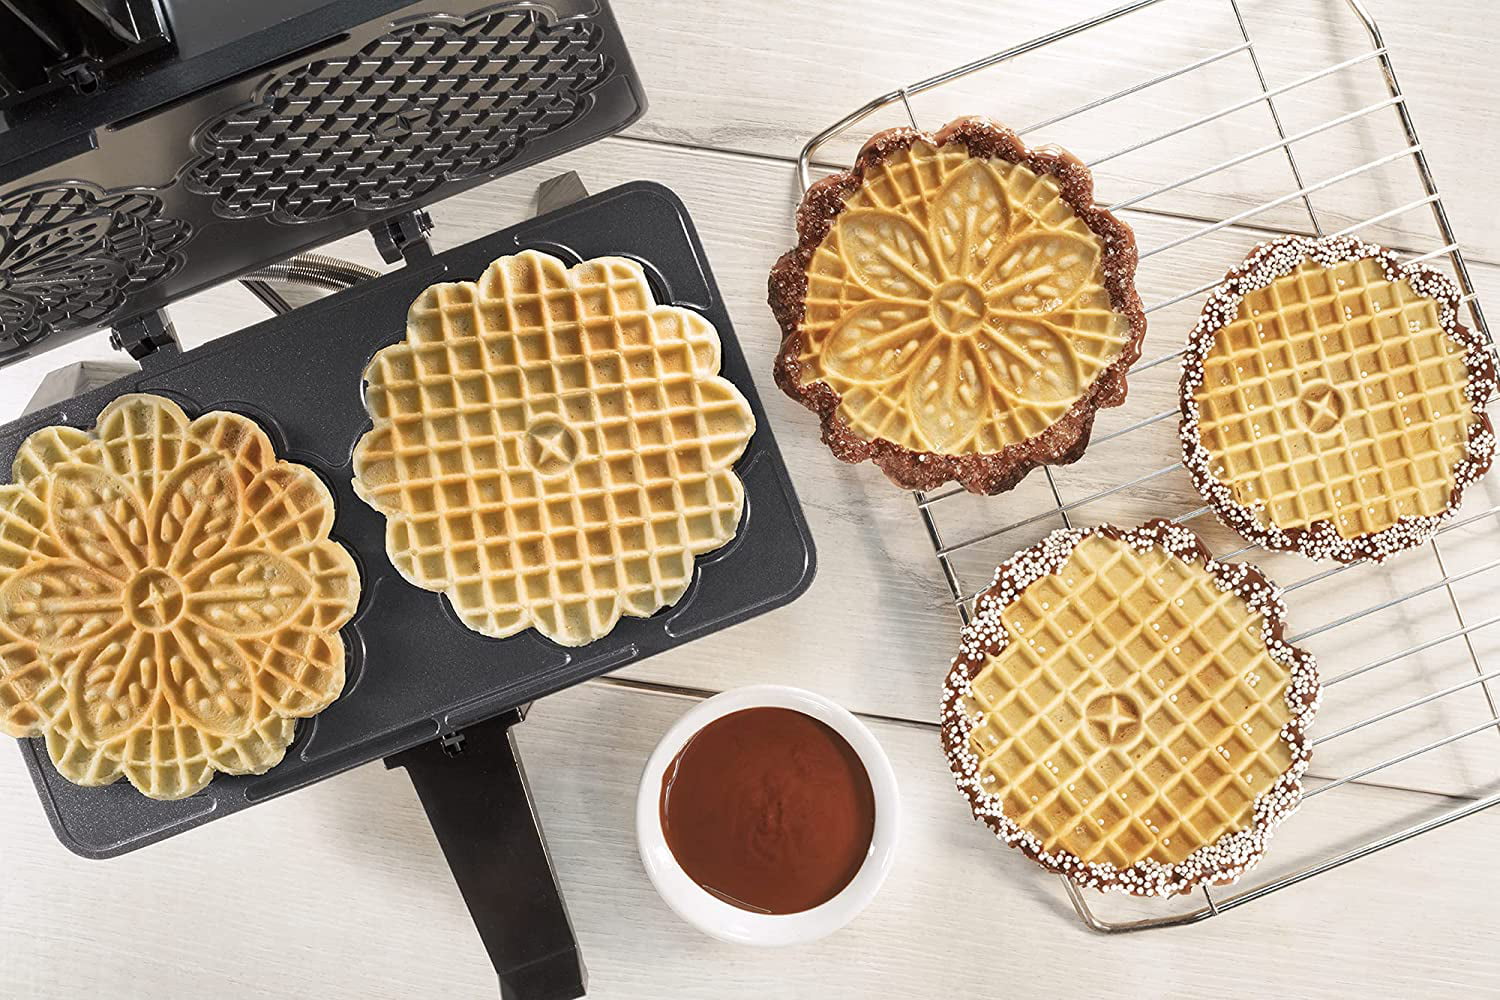 FineMade Pizzelle Maker with Non-Stick Coating, Electric Pizzelle Cookie  Baker Press with Snowflake Pattern, Make Two 4 Inch Traditional Italian